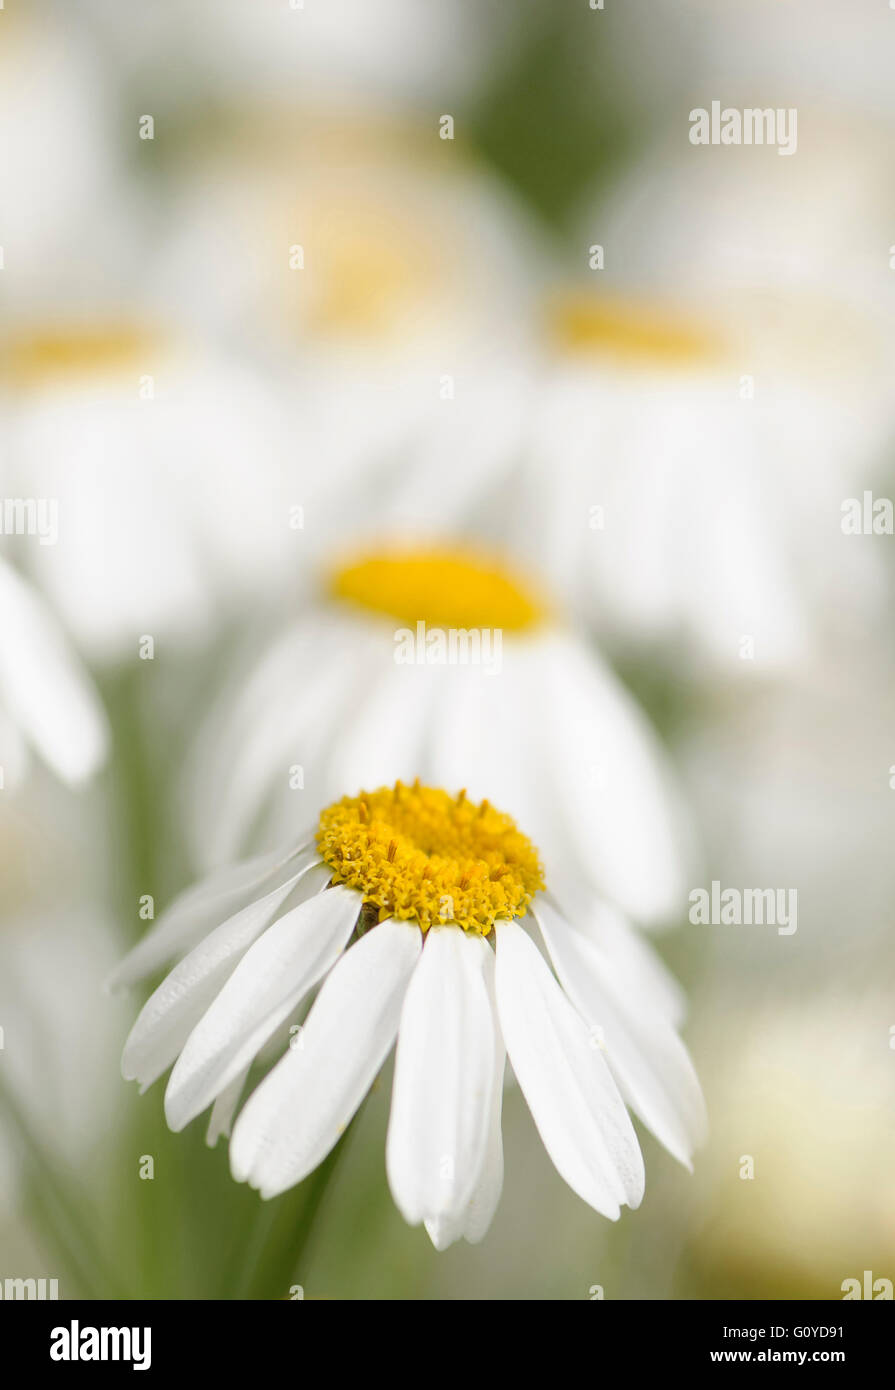 Dalmatian Chrysanthemum, Tanacetum, Tanacetum cinerariifolium, Balkans indigenous, Beauty in Nature, Colour, Cottage garden plant, Dalmatian insect flower, Dalmation pyrethrum, Flower, Summer Flowering, Frost hardy, Growing, Insecticide daisy, Outdoor, Perennial, Plant, Pyrethrum daisy, Stamen, White, Stock Photo